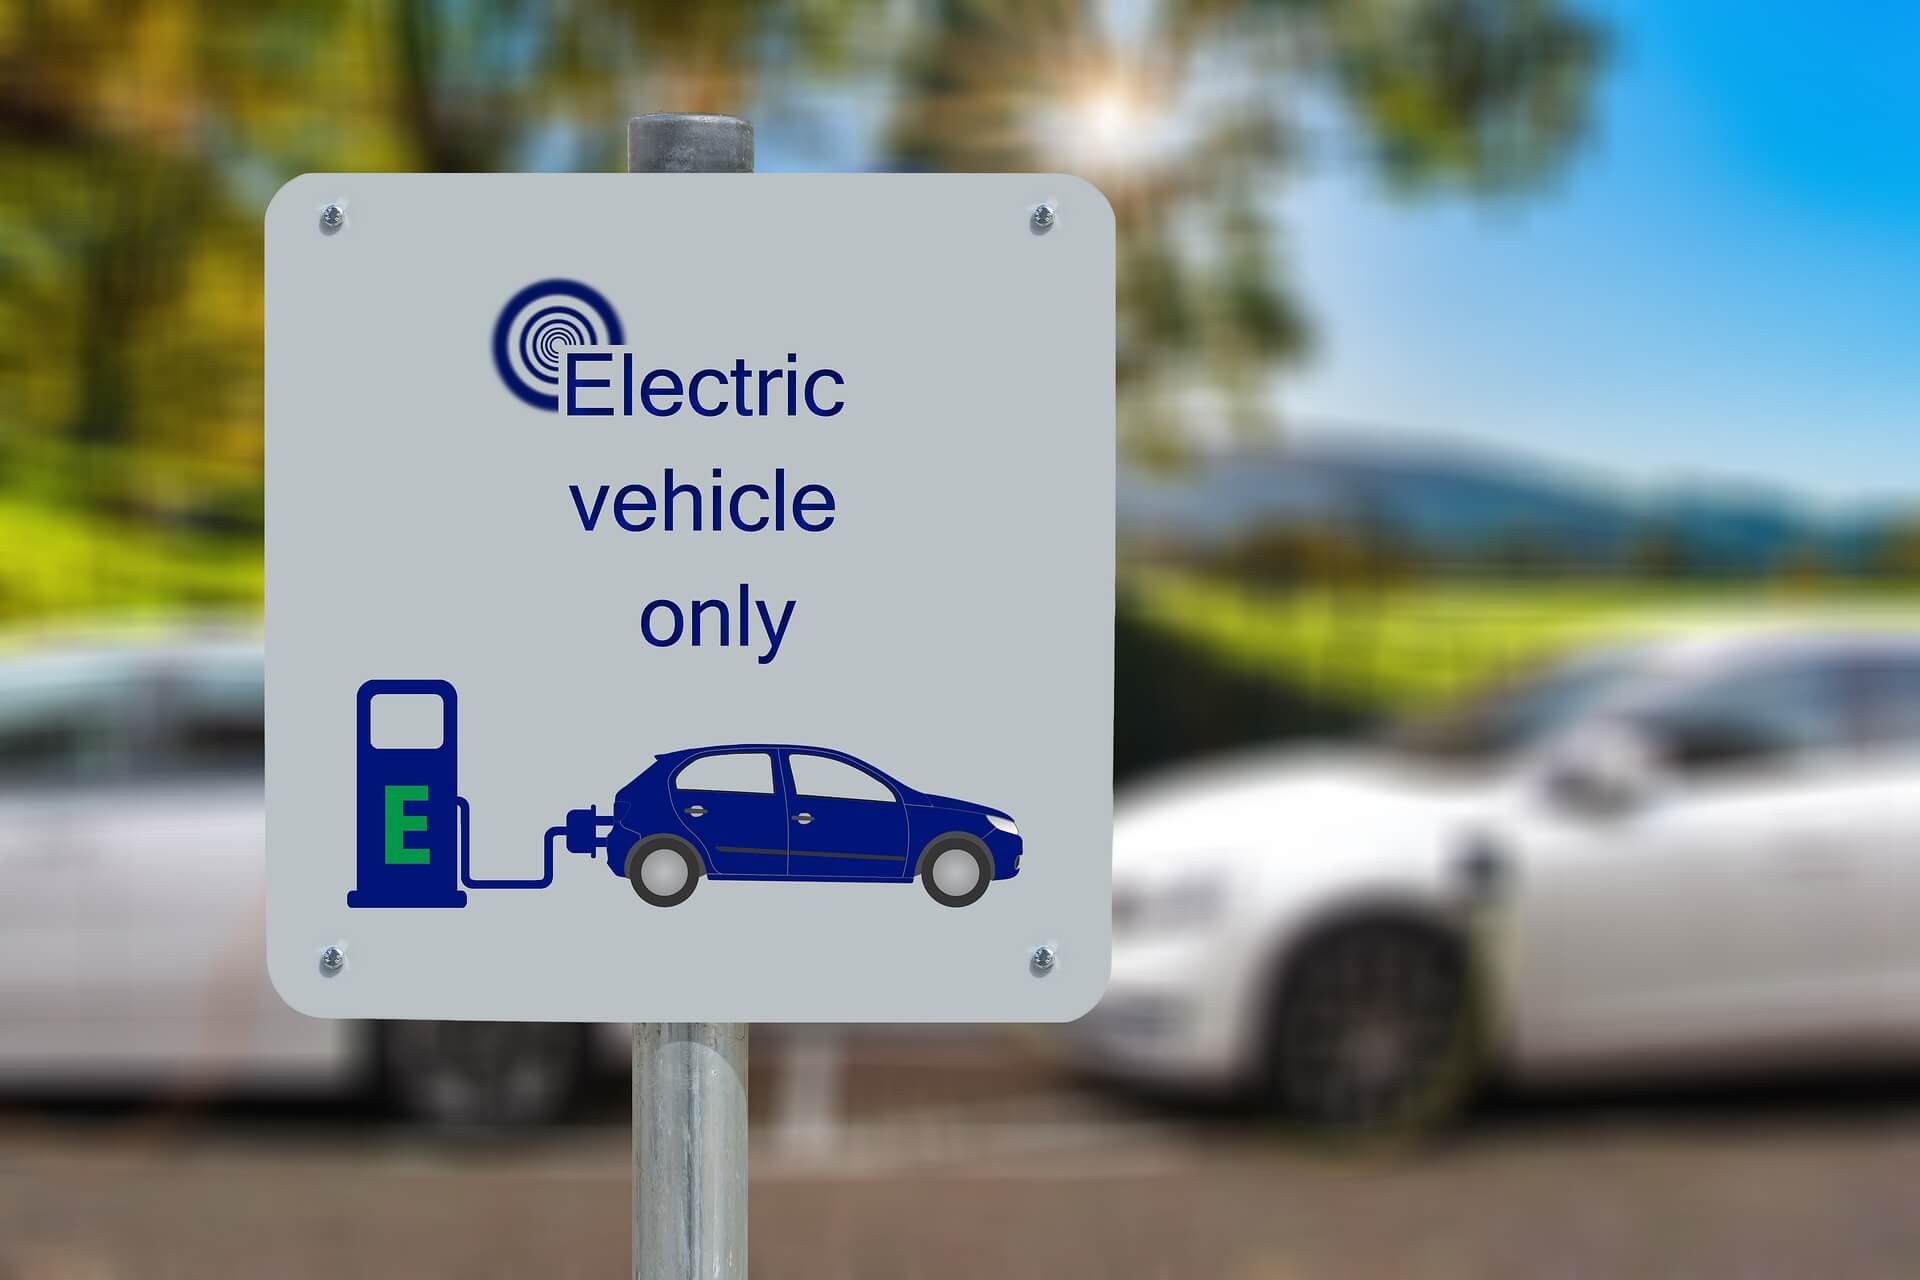 charging station for electric vehicles only